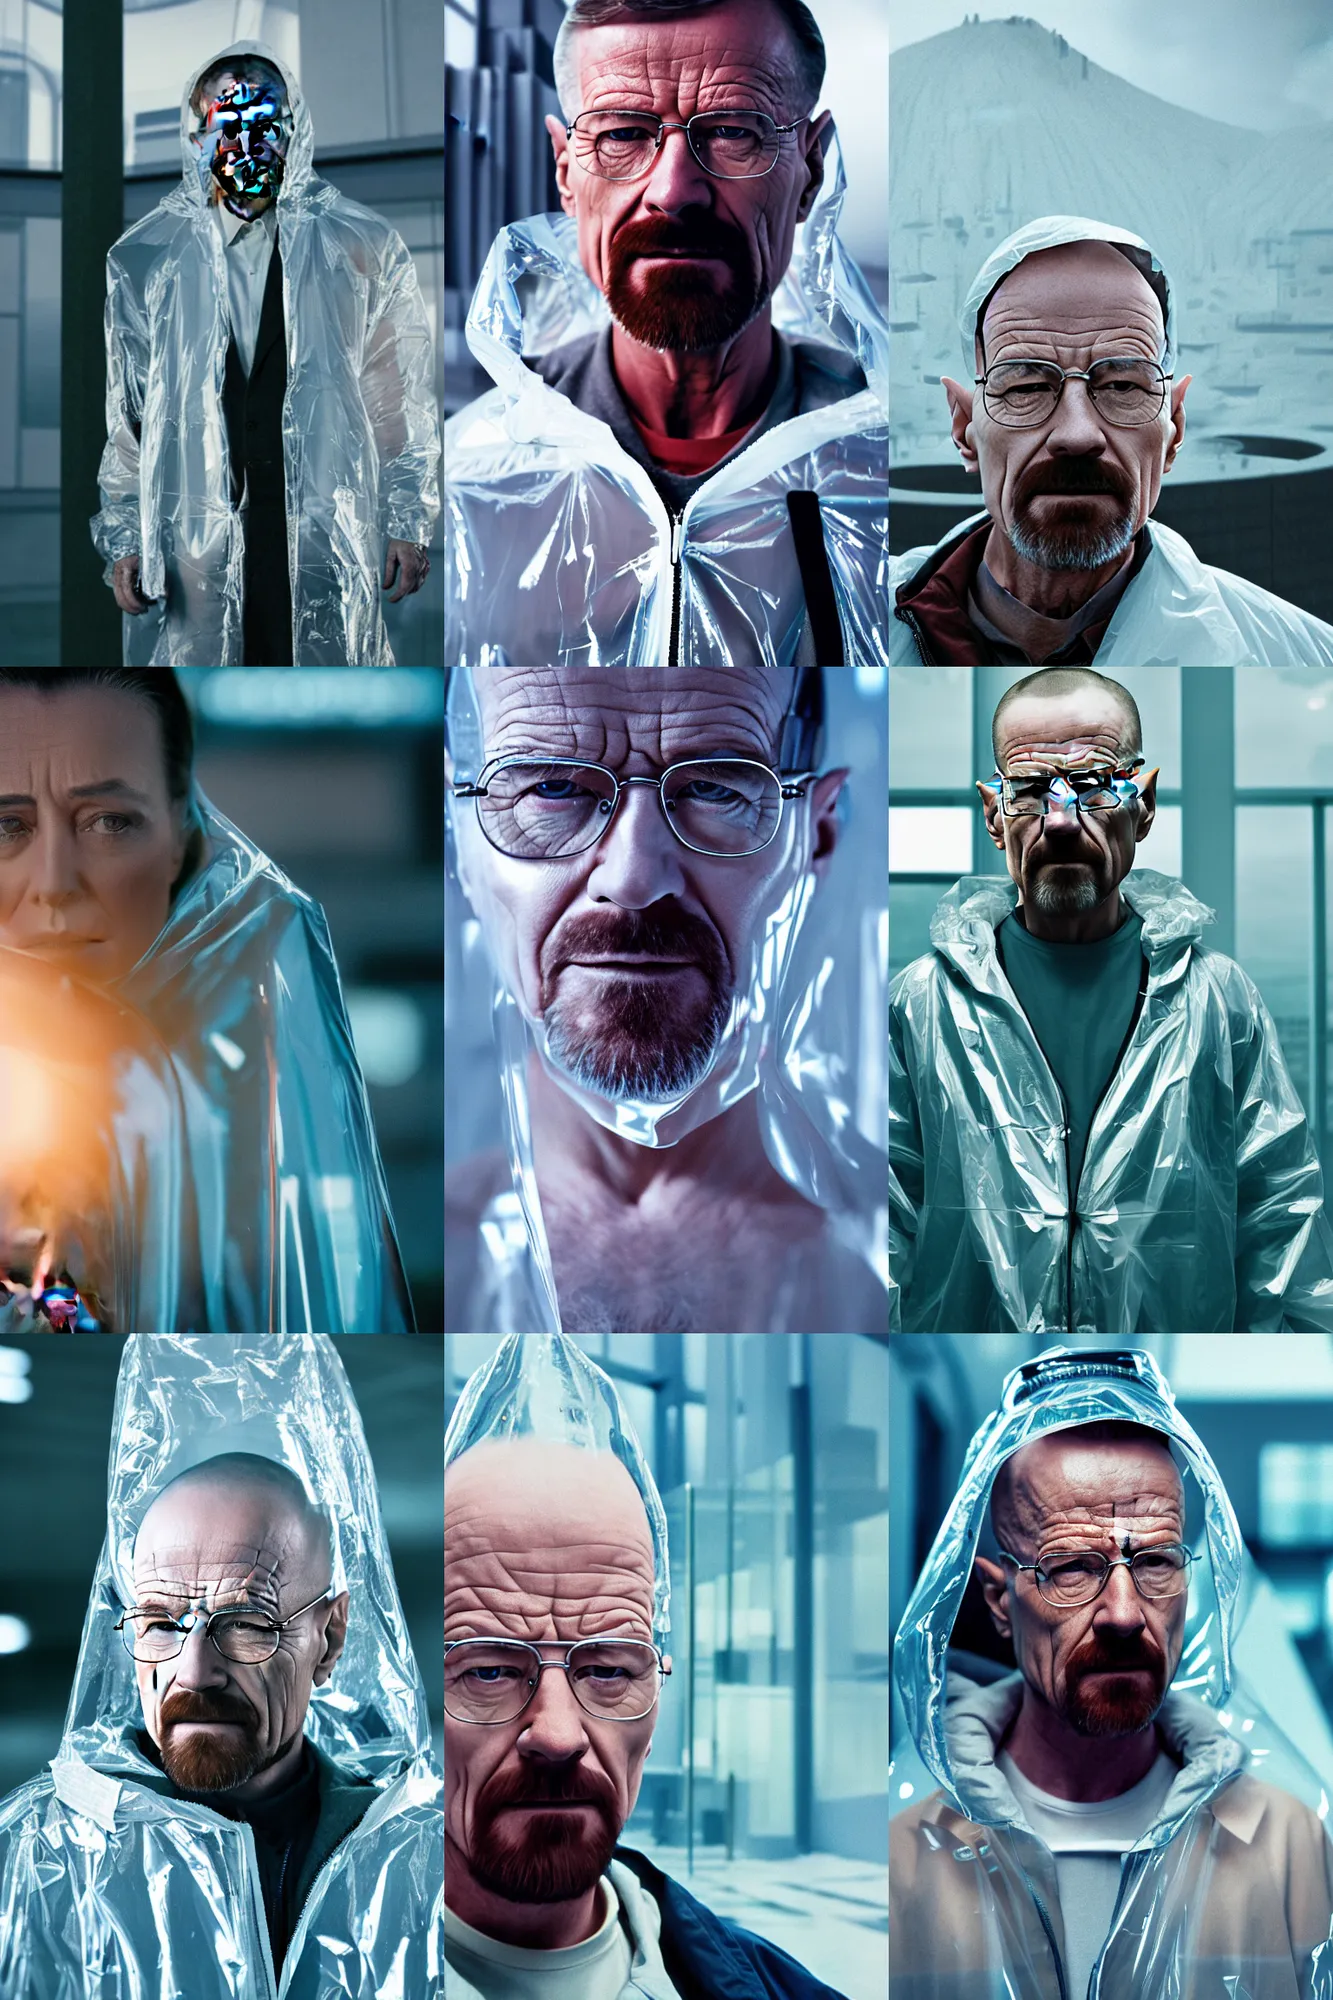 Prompt: Cinestill 50d, 8K, highly detailed, breaking bad style 3/4 extreme closeup portrait, eye contact, focus on clear transparent raincoat walter white model, tilt shift zaha hadid style laboratory background: famous blade runner remake, new mexico lab scene